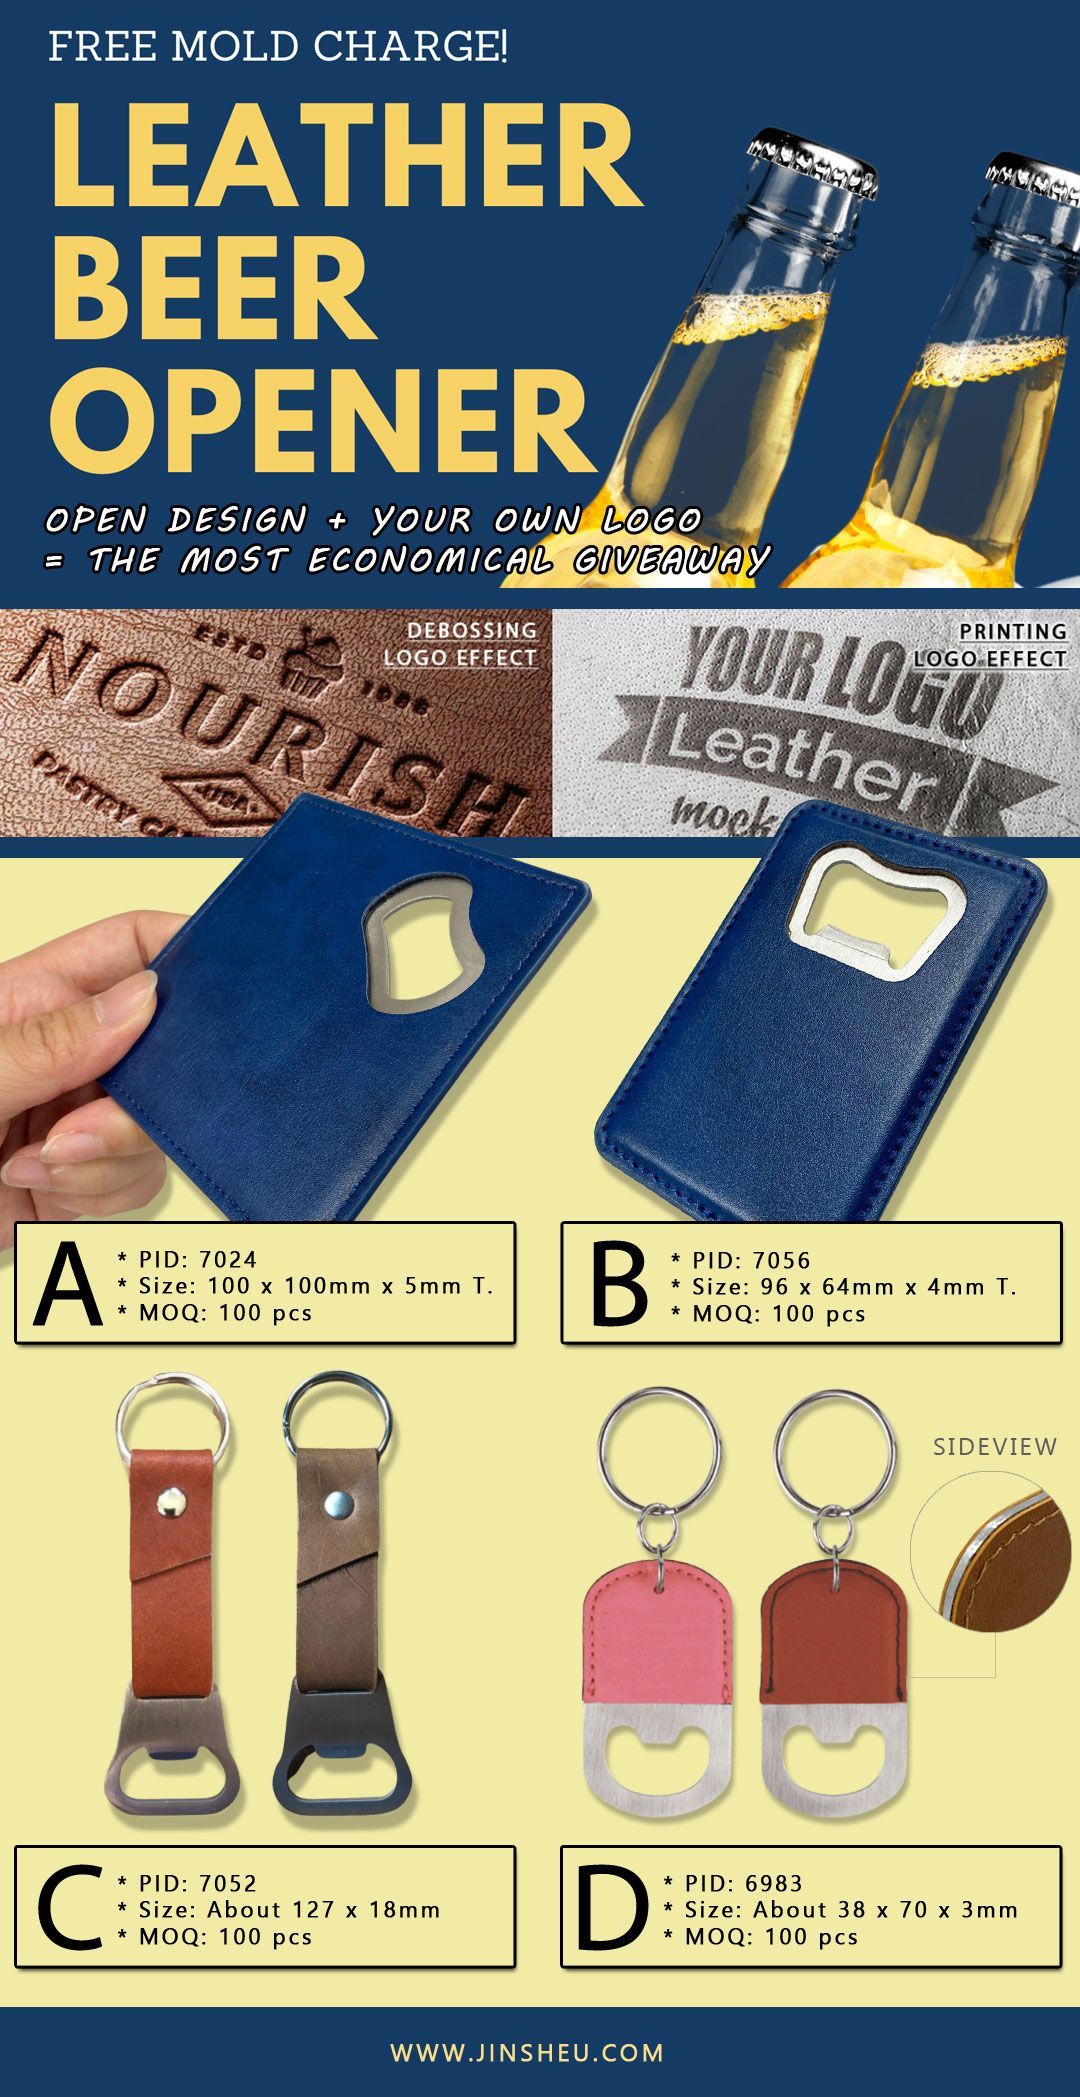 promotional leather beer openers